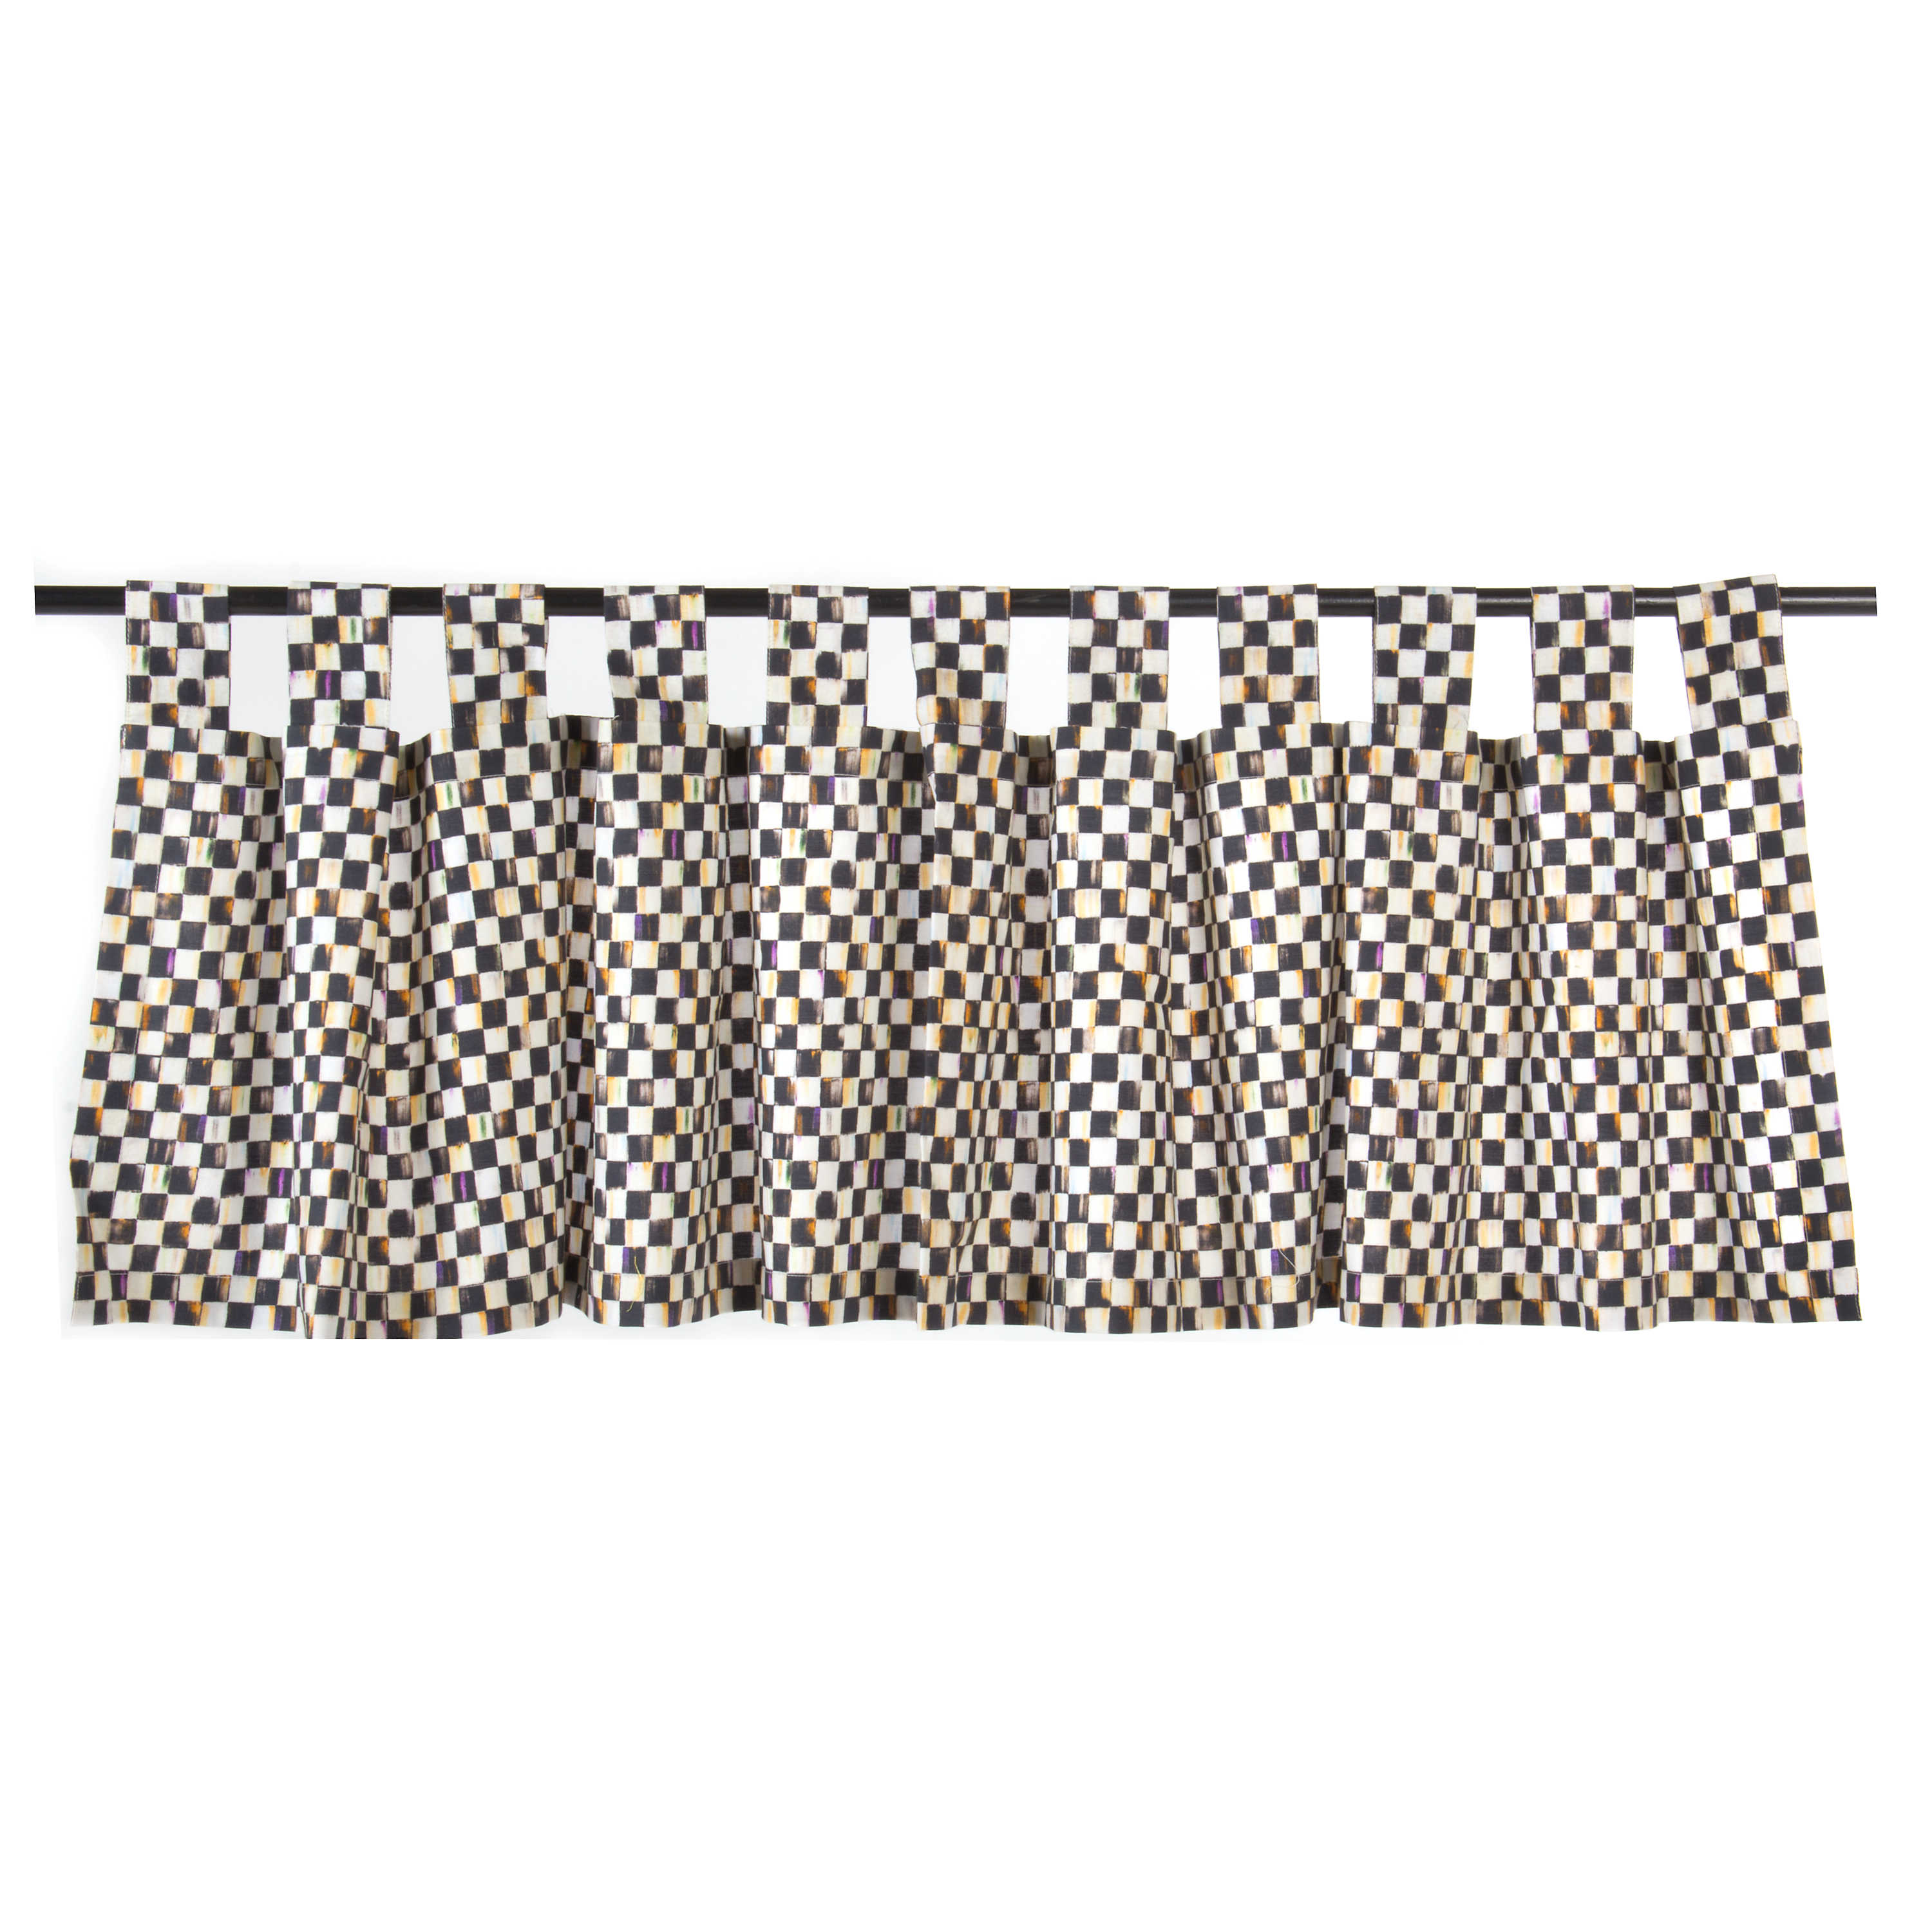 Courtly Check Tab Top Cafe Valance mackenzie-childs Panama 0